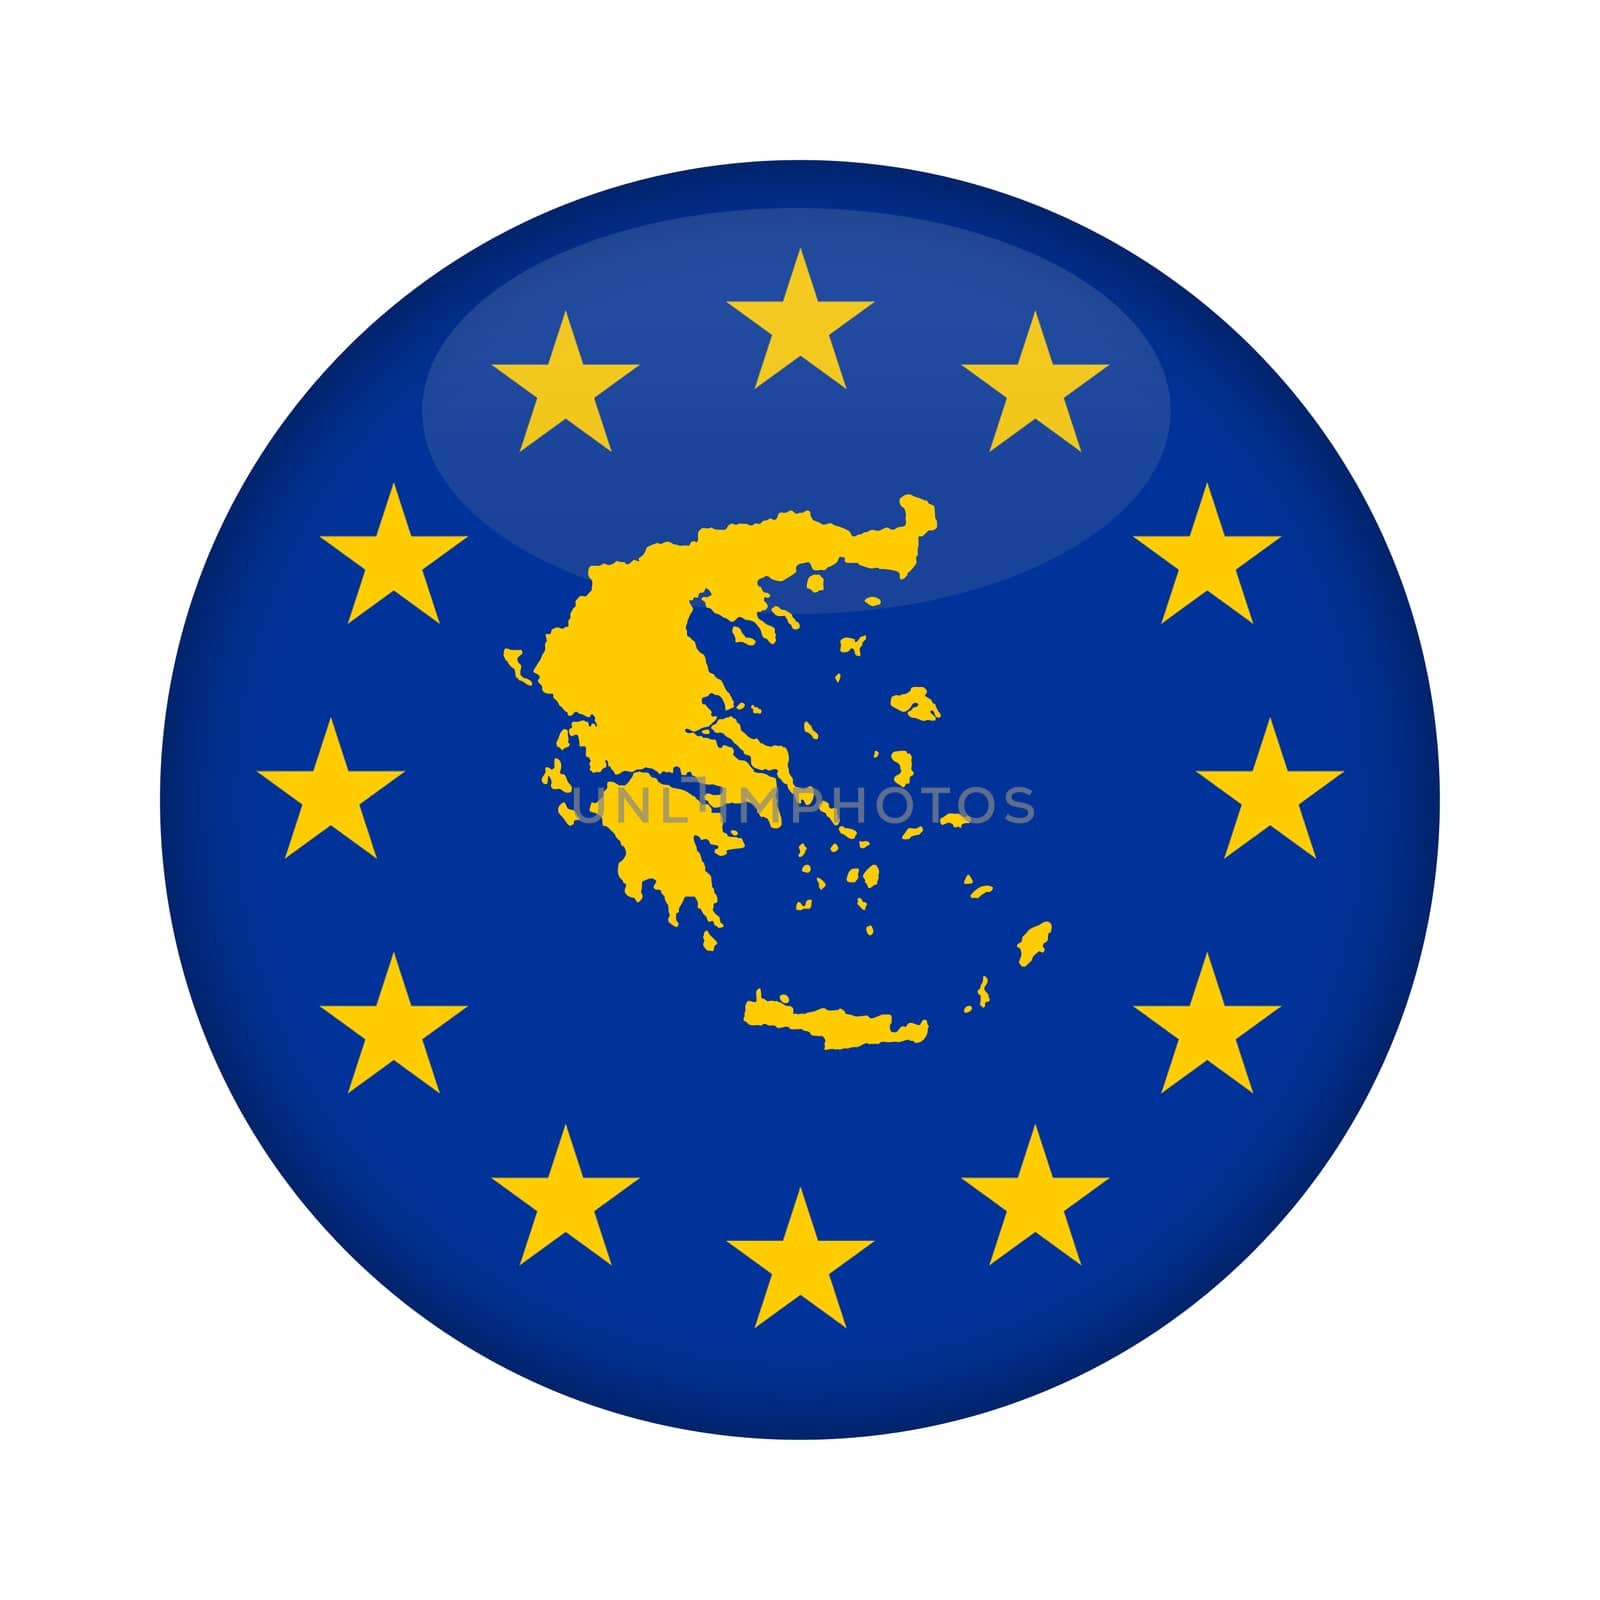 Greece map on a European Union flag button isolated on a white background.